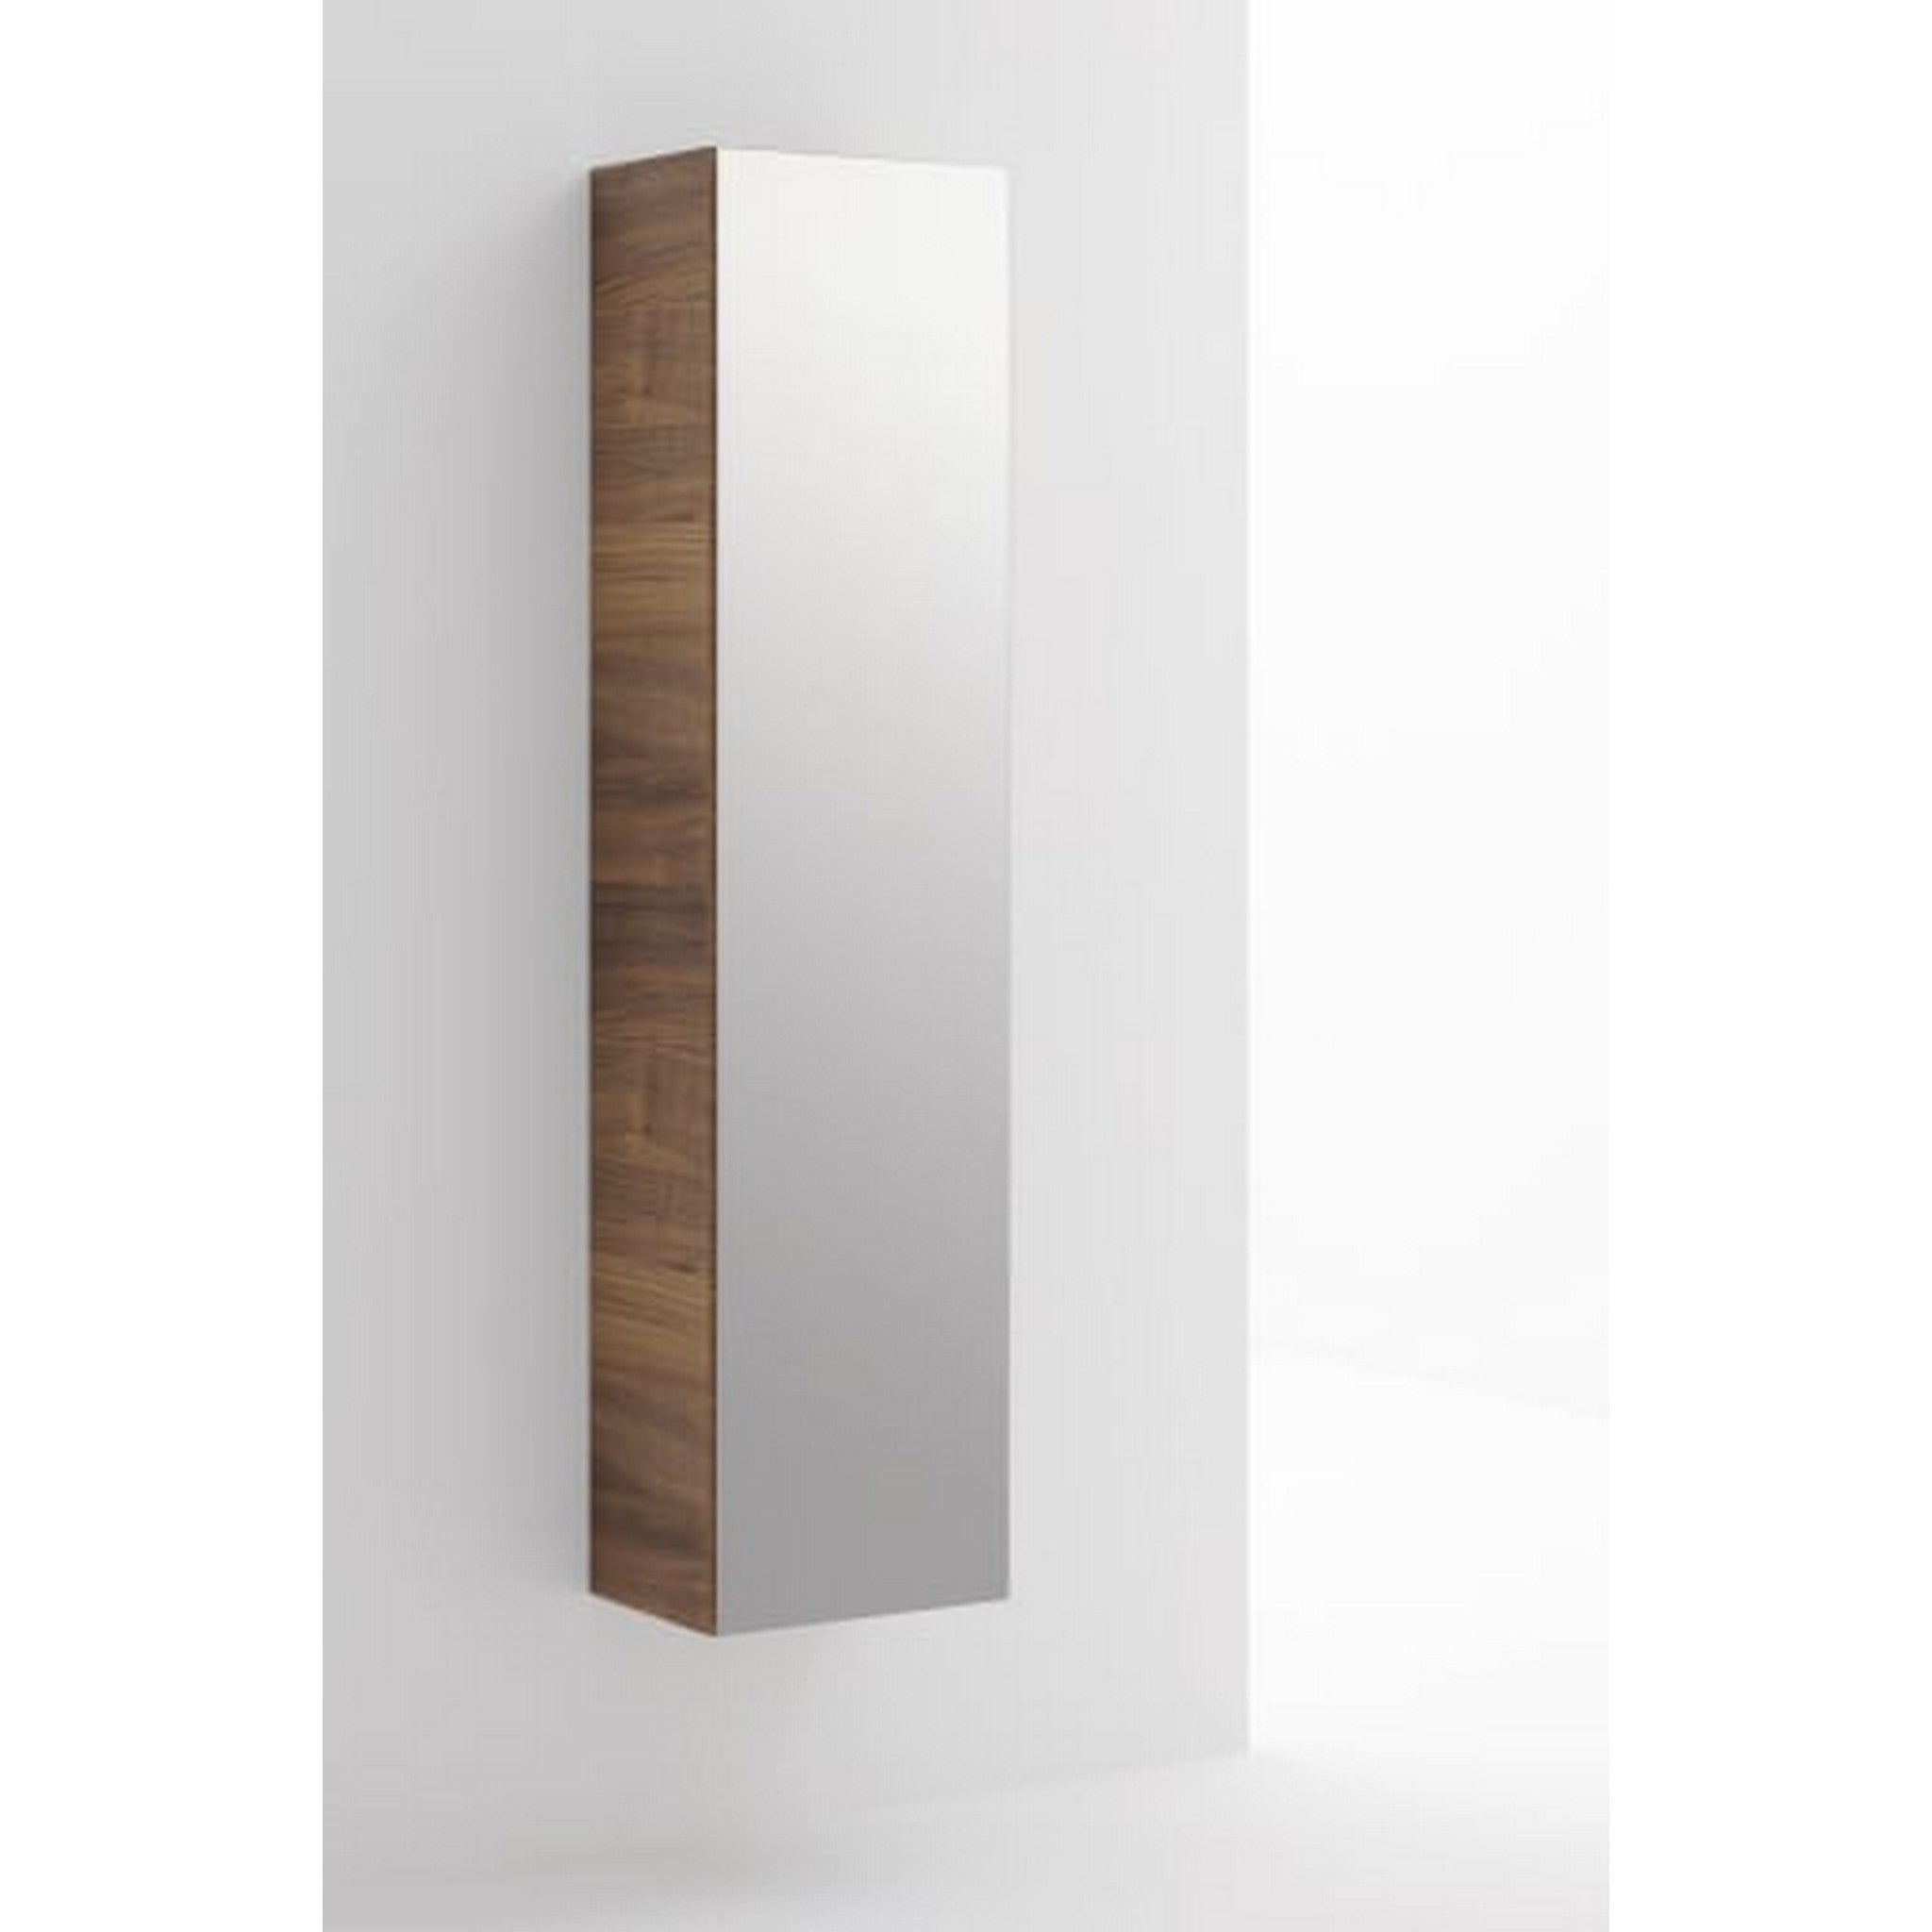 Laufen, Laufen IlBagnoAlessi 16" x 67" Glossy White Wall-Mounted Left-Hinged Tall Cabinet With Mirrored Door and 4 Glass Shelves